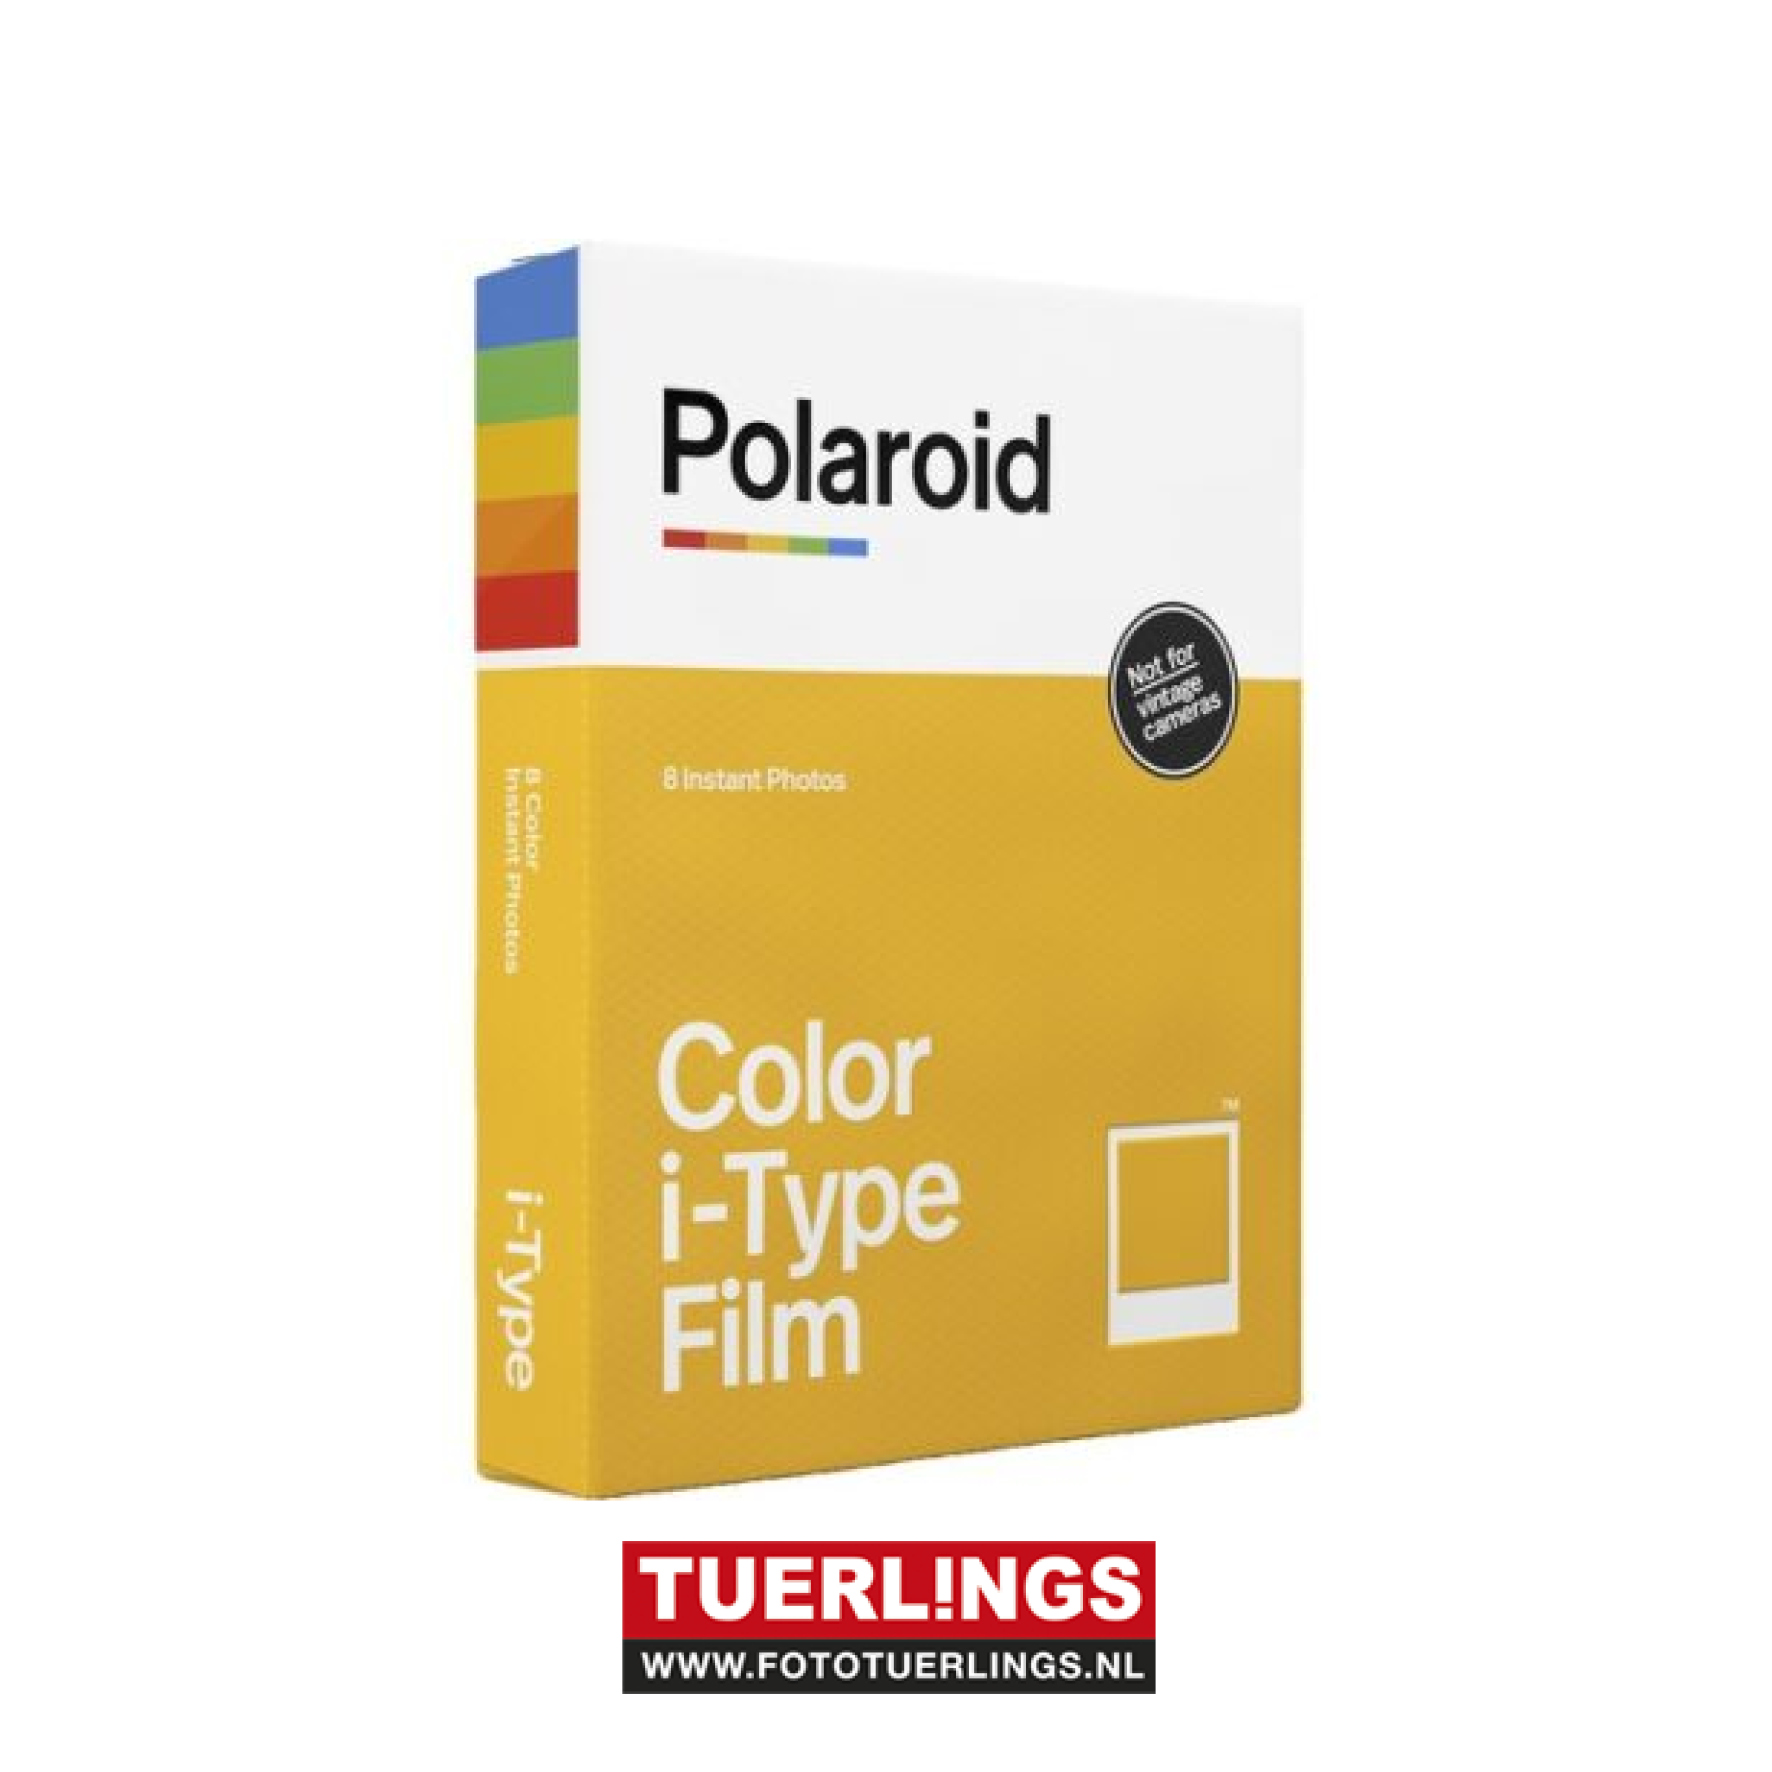 Polaroid Color instant for I-type - Foto Tuerlings